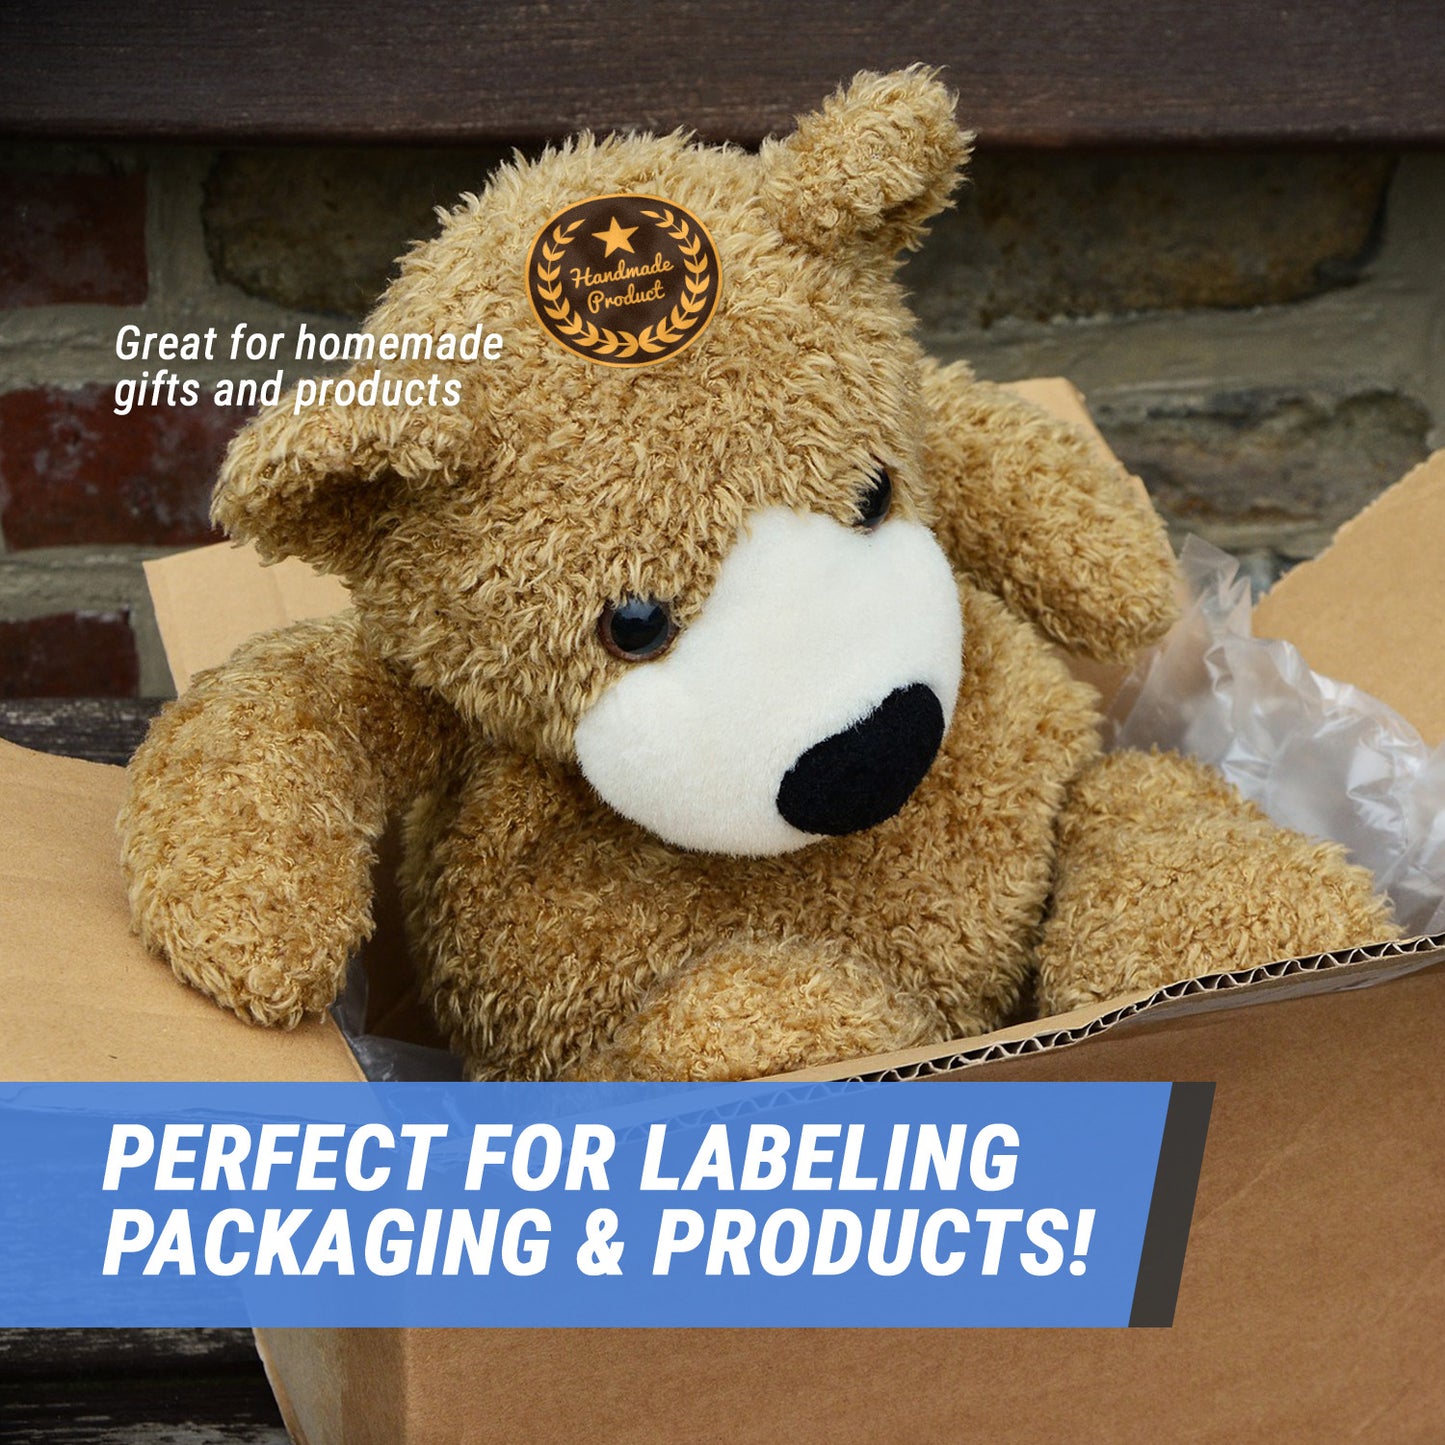 2 inch | Food Labeling: Retail & Sales: Handmade Product Stickers